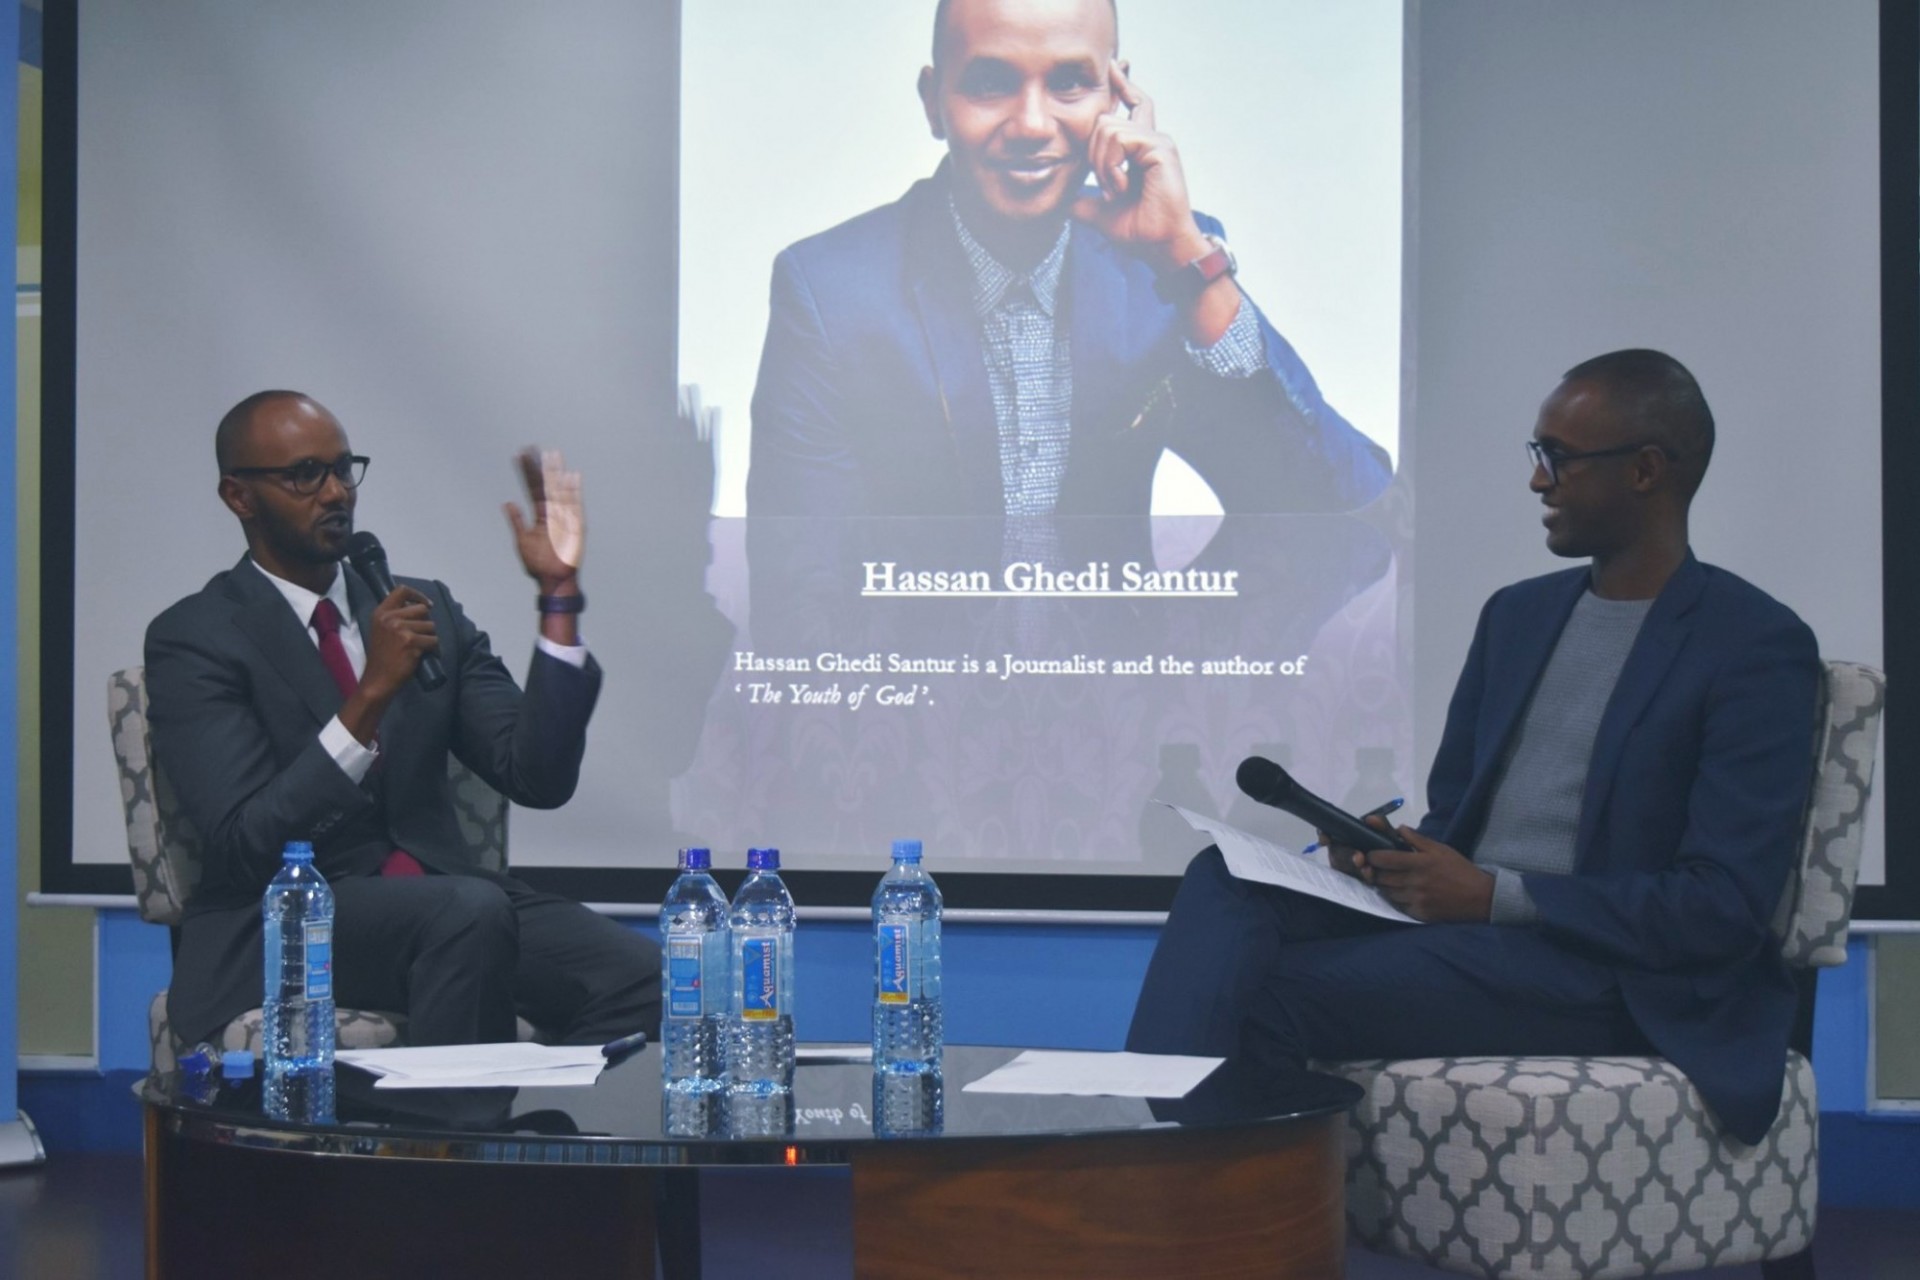 Author Hassan Sentur and moderator Abdi Latiff during the booklaunch of 'The Youth of God"